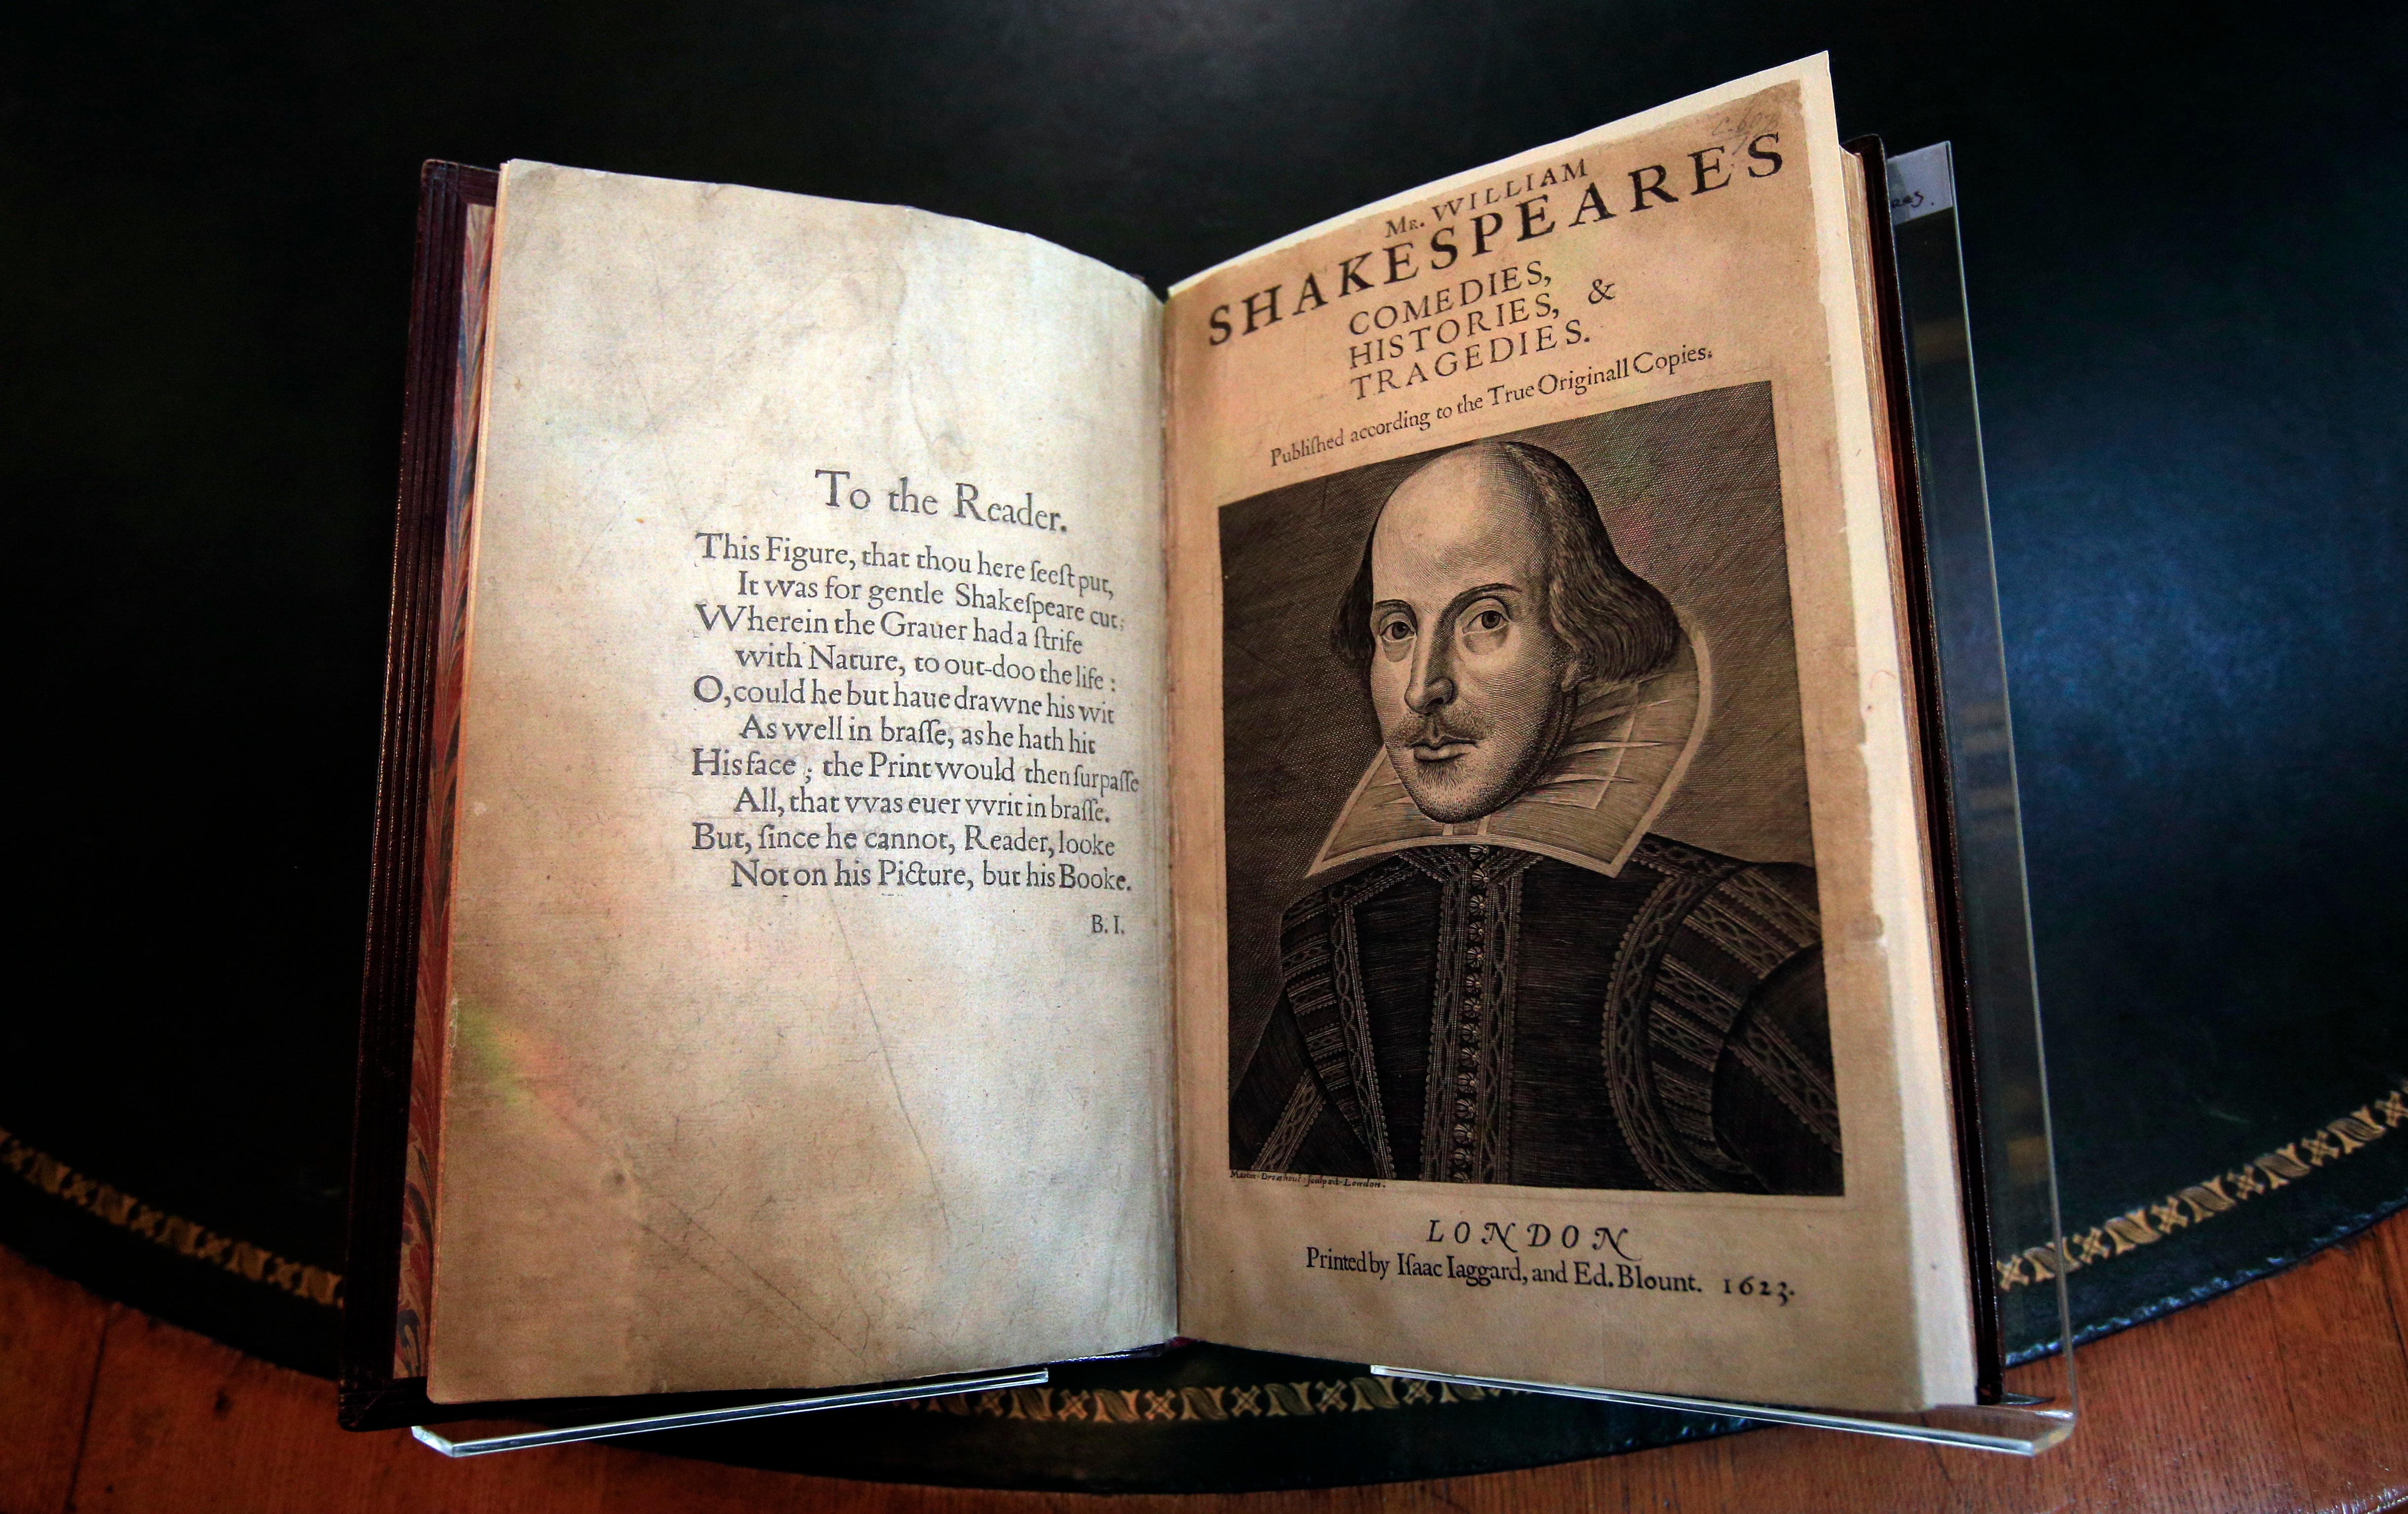 The first folio of Shakespeare’s collected plays published in 1623